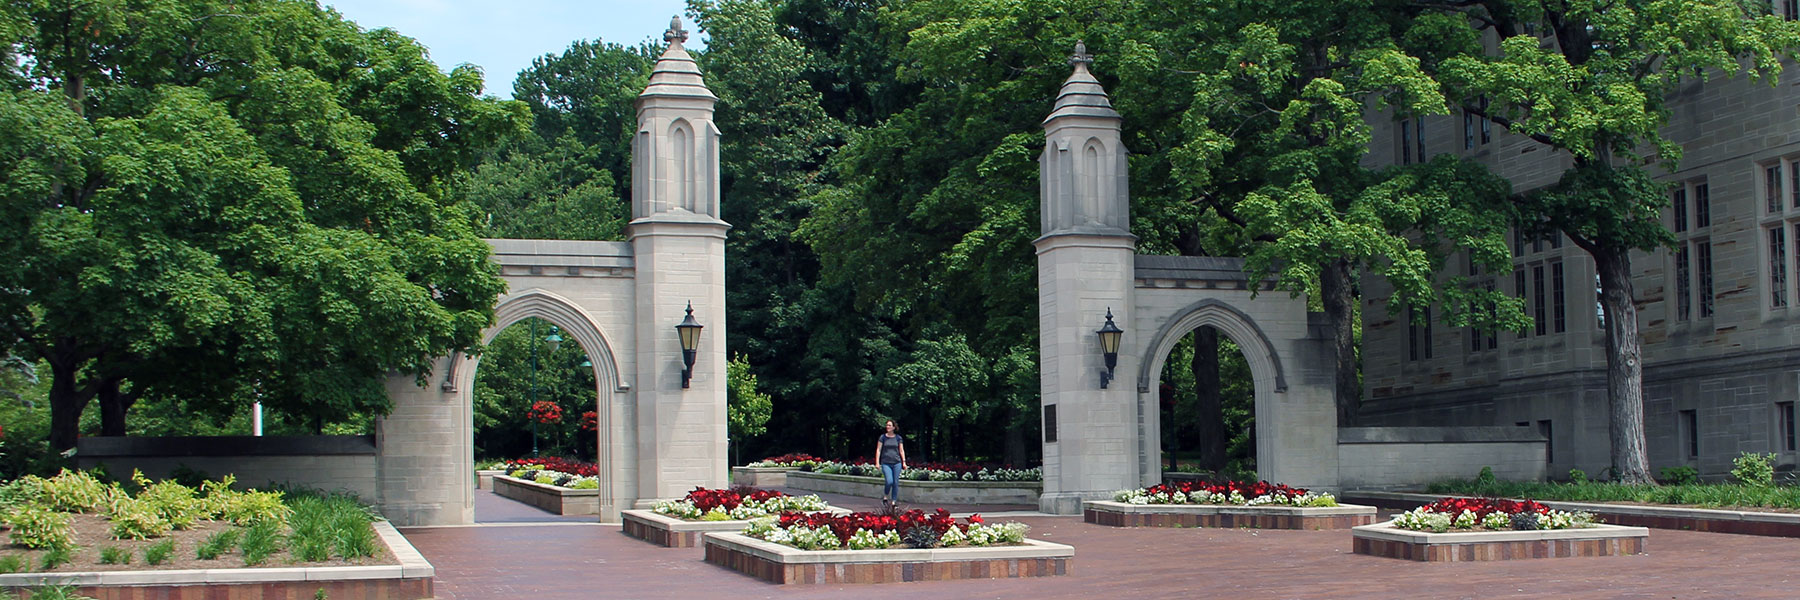 Virtual Visits Visit Options Visit IU Office of Admissions Indiana